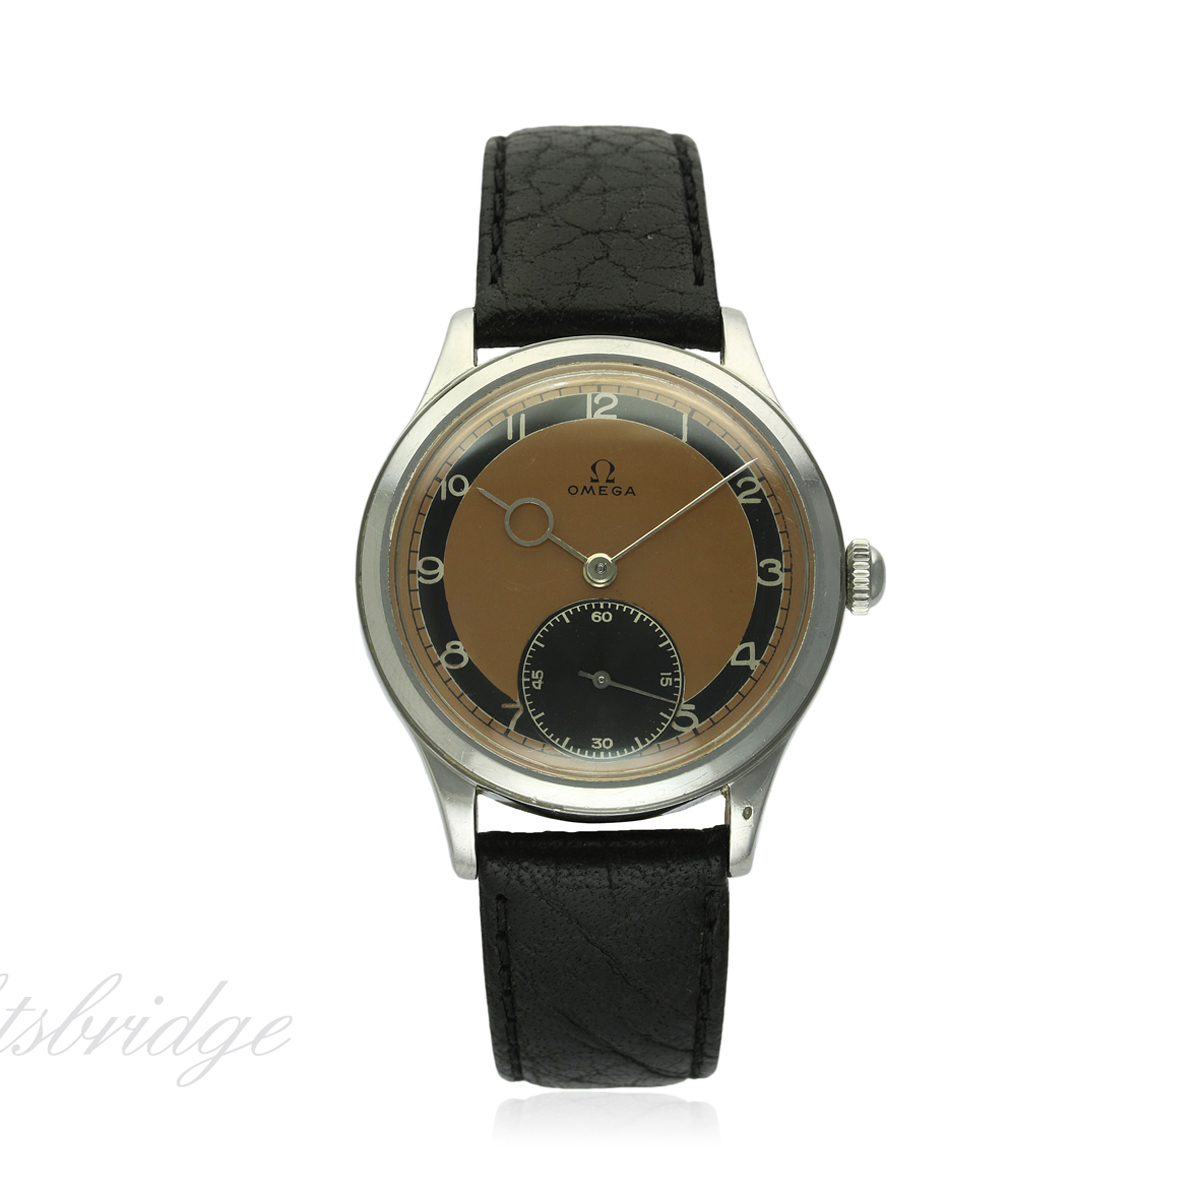 A GENTLEMAN'S STAINLESS STEEL OMEGA WRIST WATCH CIRCA 1939, REF. 2169
D: Two tone copper & black